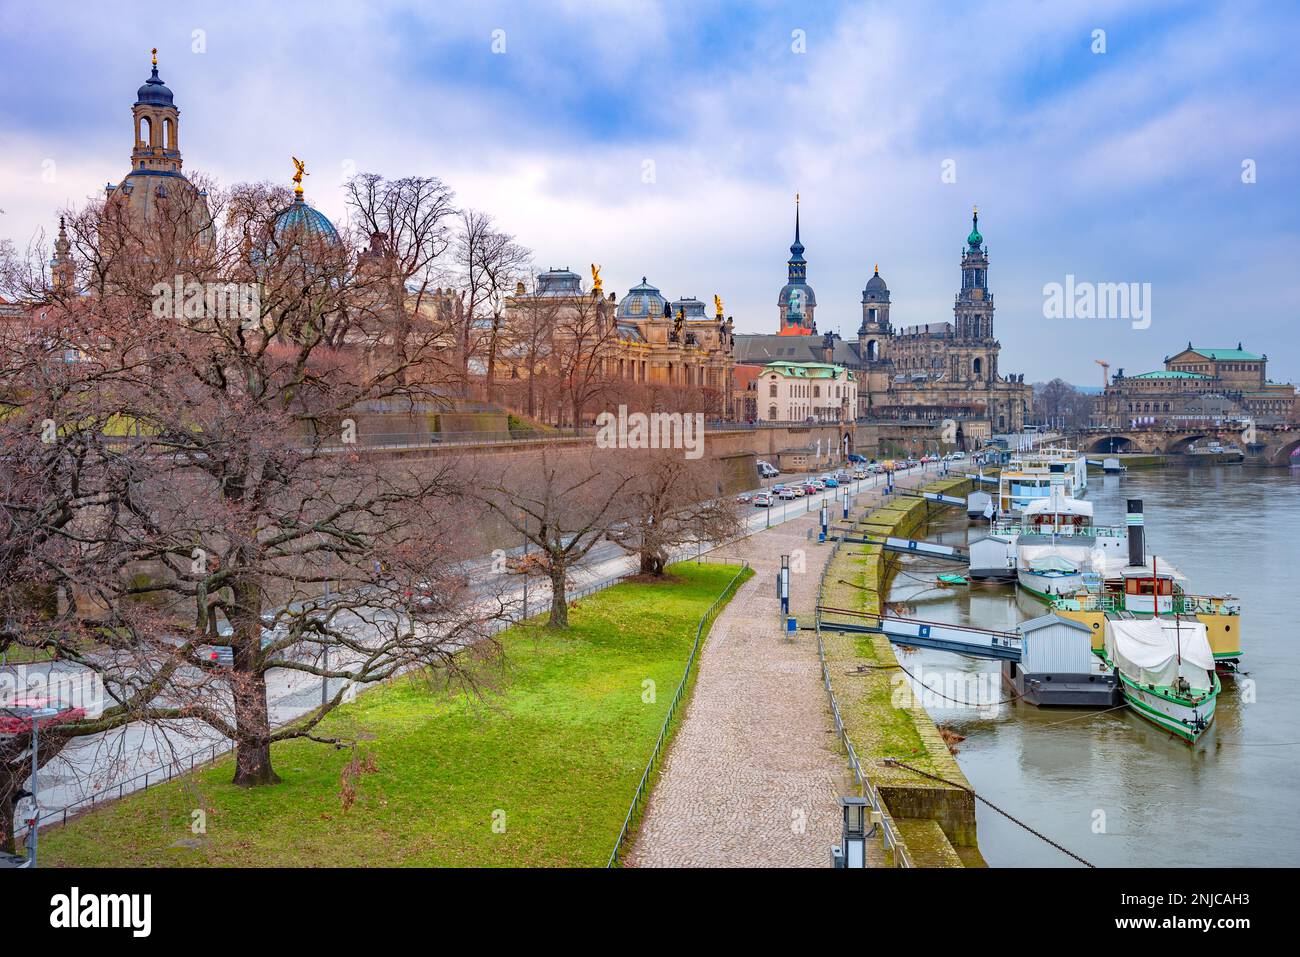 Old town of baroque Dresden, popular touristic attraction, Germany Stock Photo